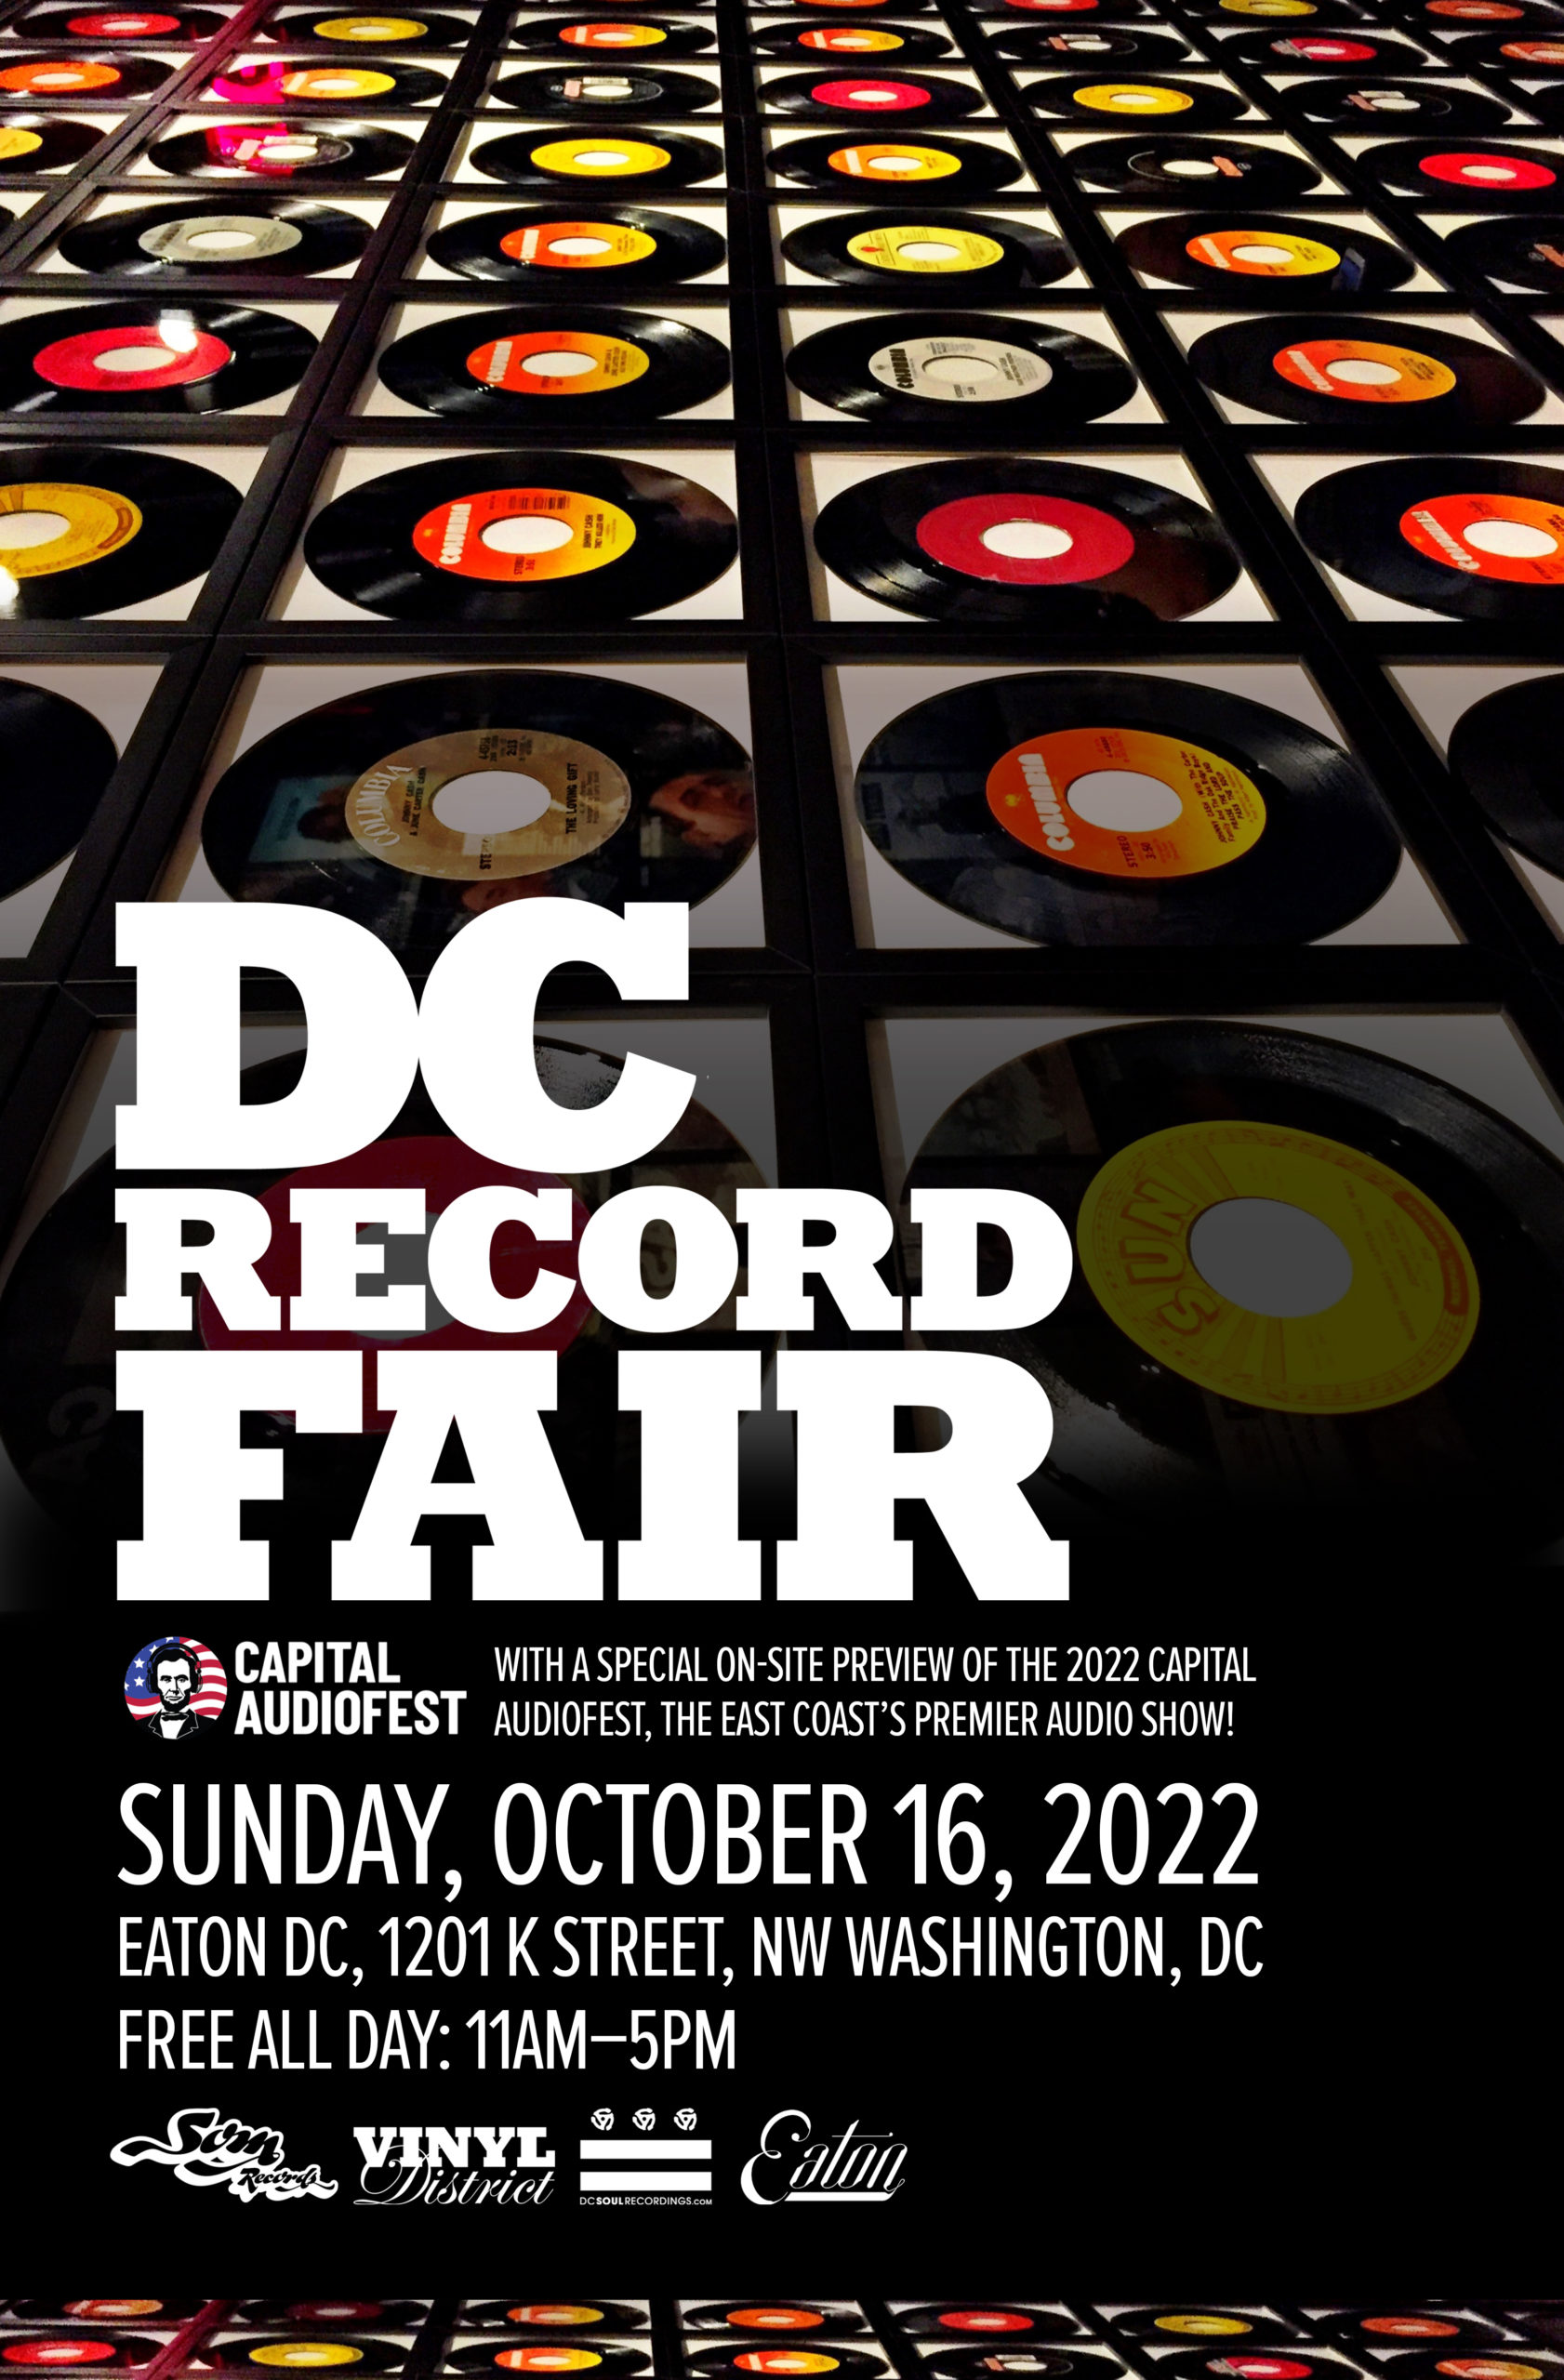 The DC Record Fair returns to the Eaton DC with a special Capital